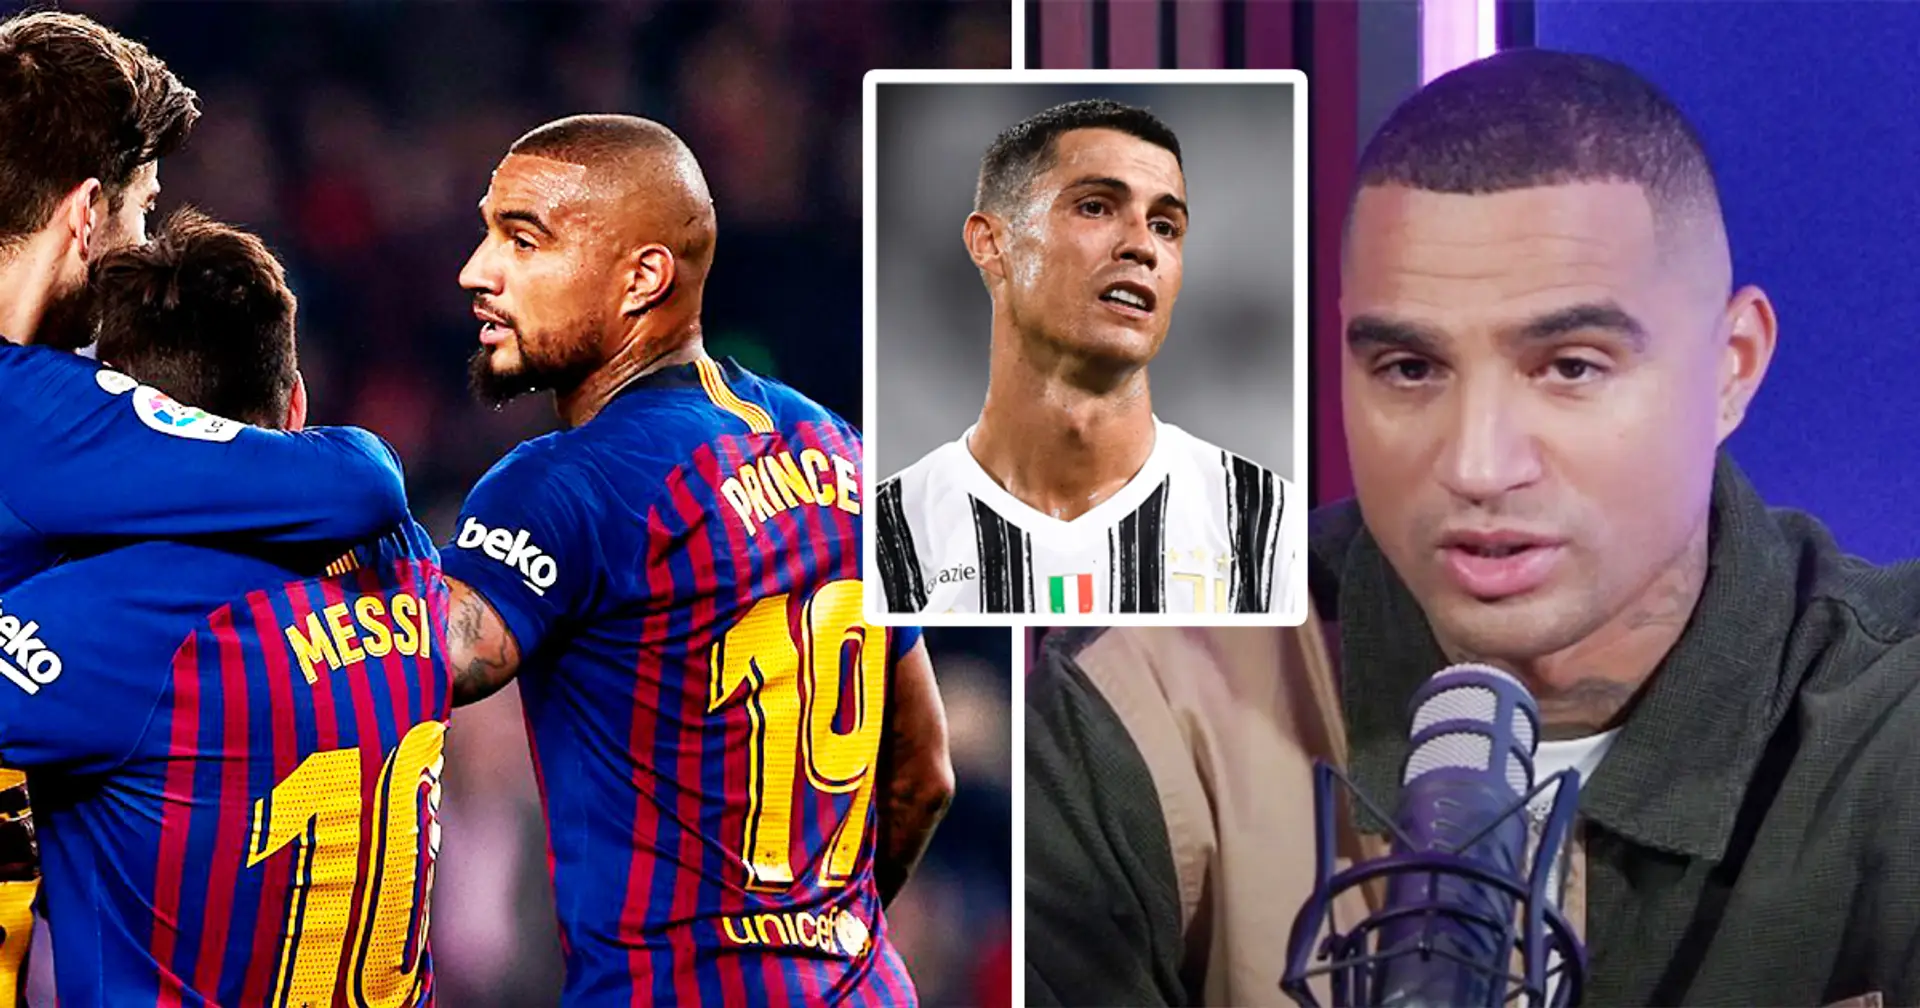 Is it difficult to score in Italy? Messi asked me because Ronaldo was there at that time – Kevin-Prince Boateng